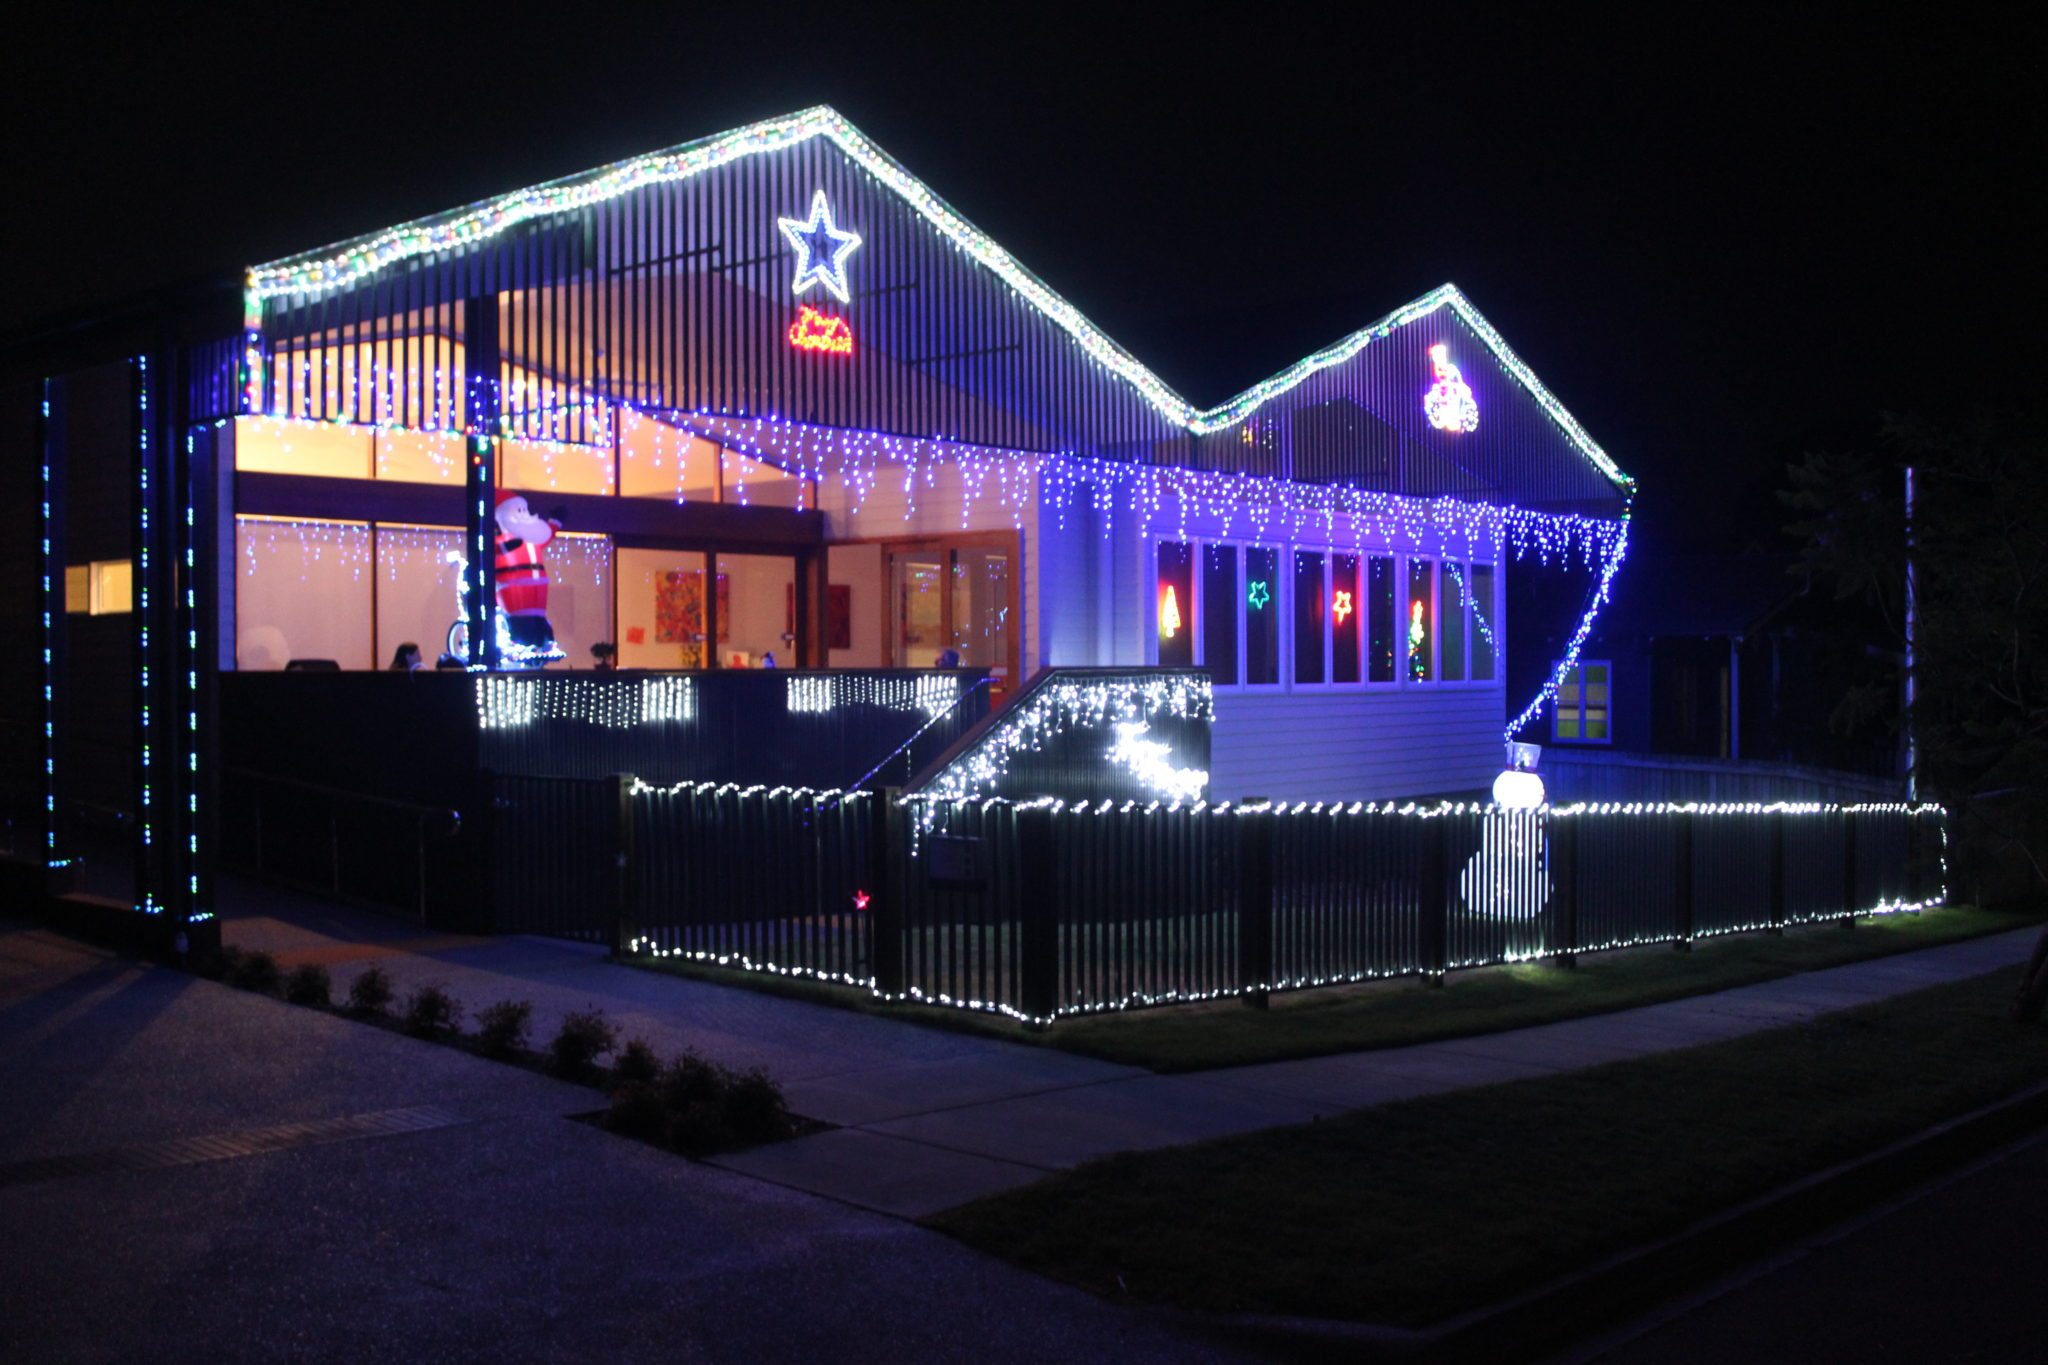 Wooloowin Share House with Christmas Lights